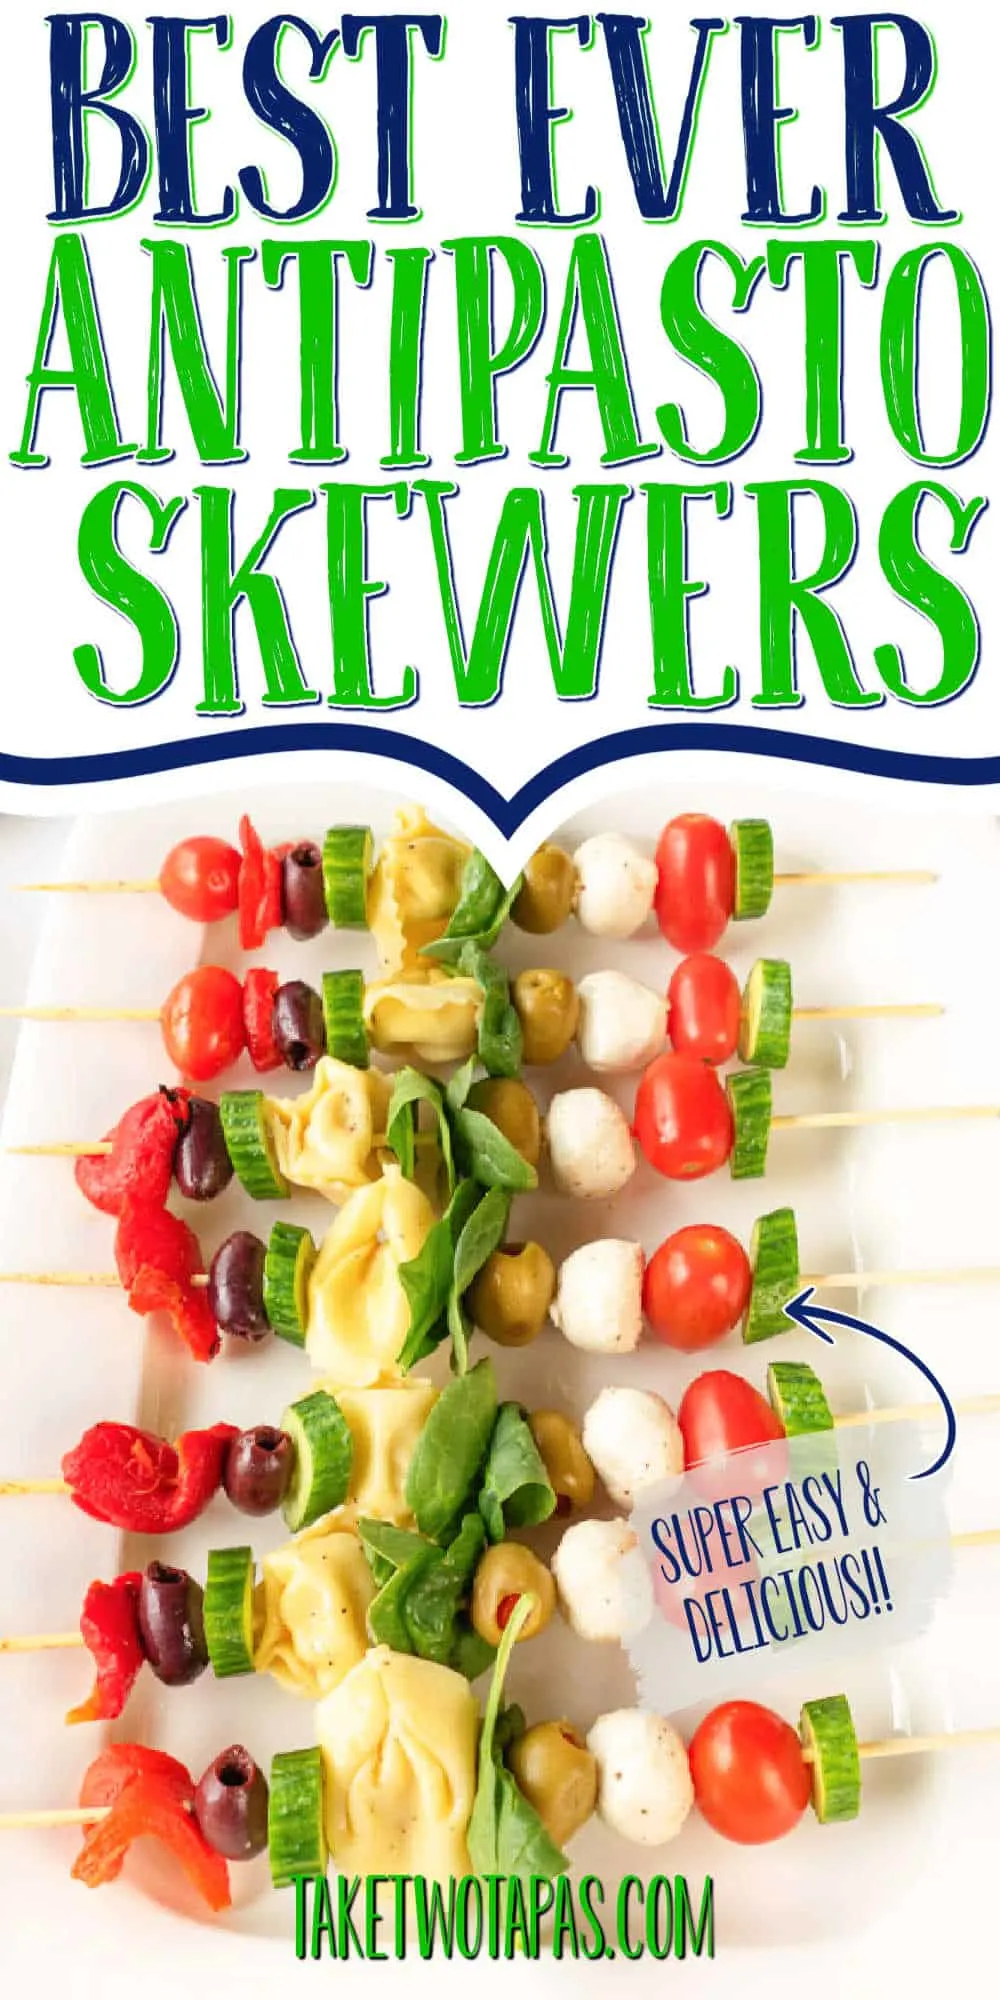 plate of antipasto with text "best ever antipasto skewers"